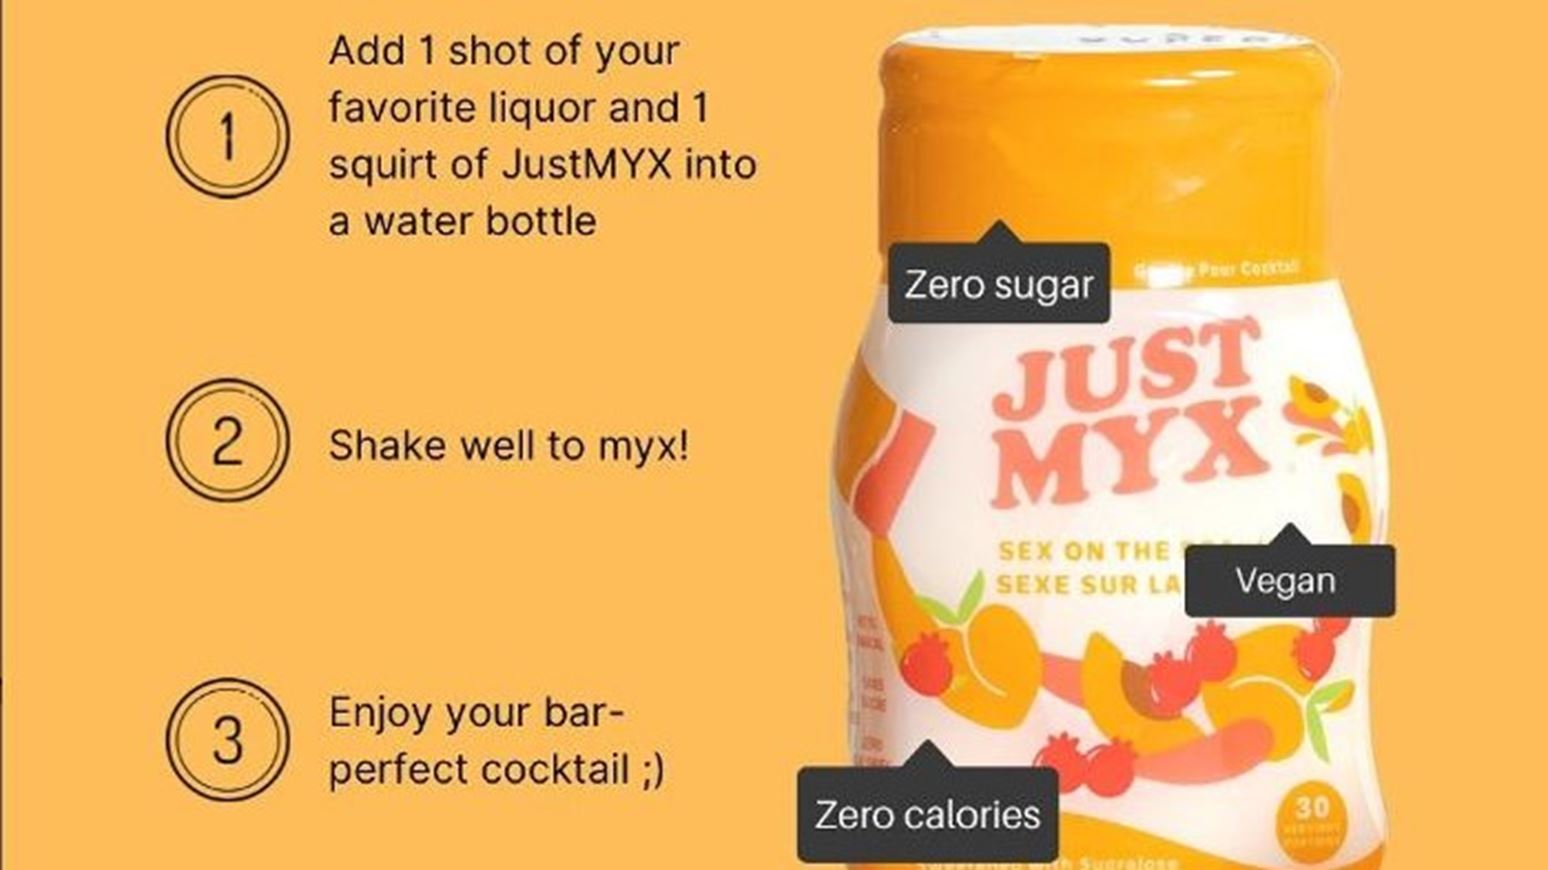 JustMYX - A guilt-free drinking companion